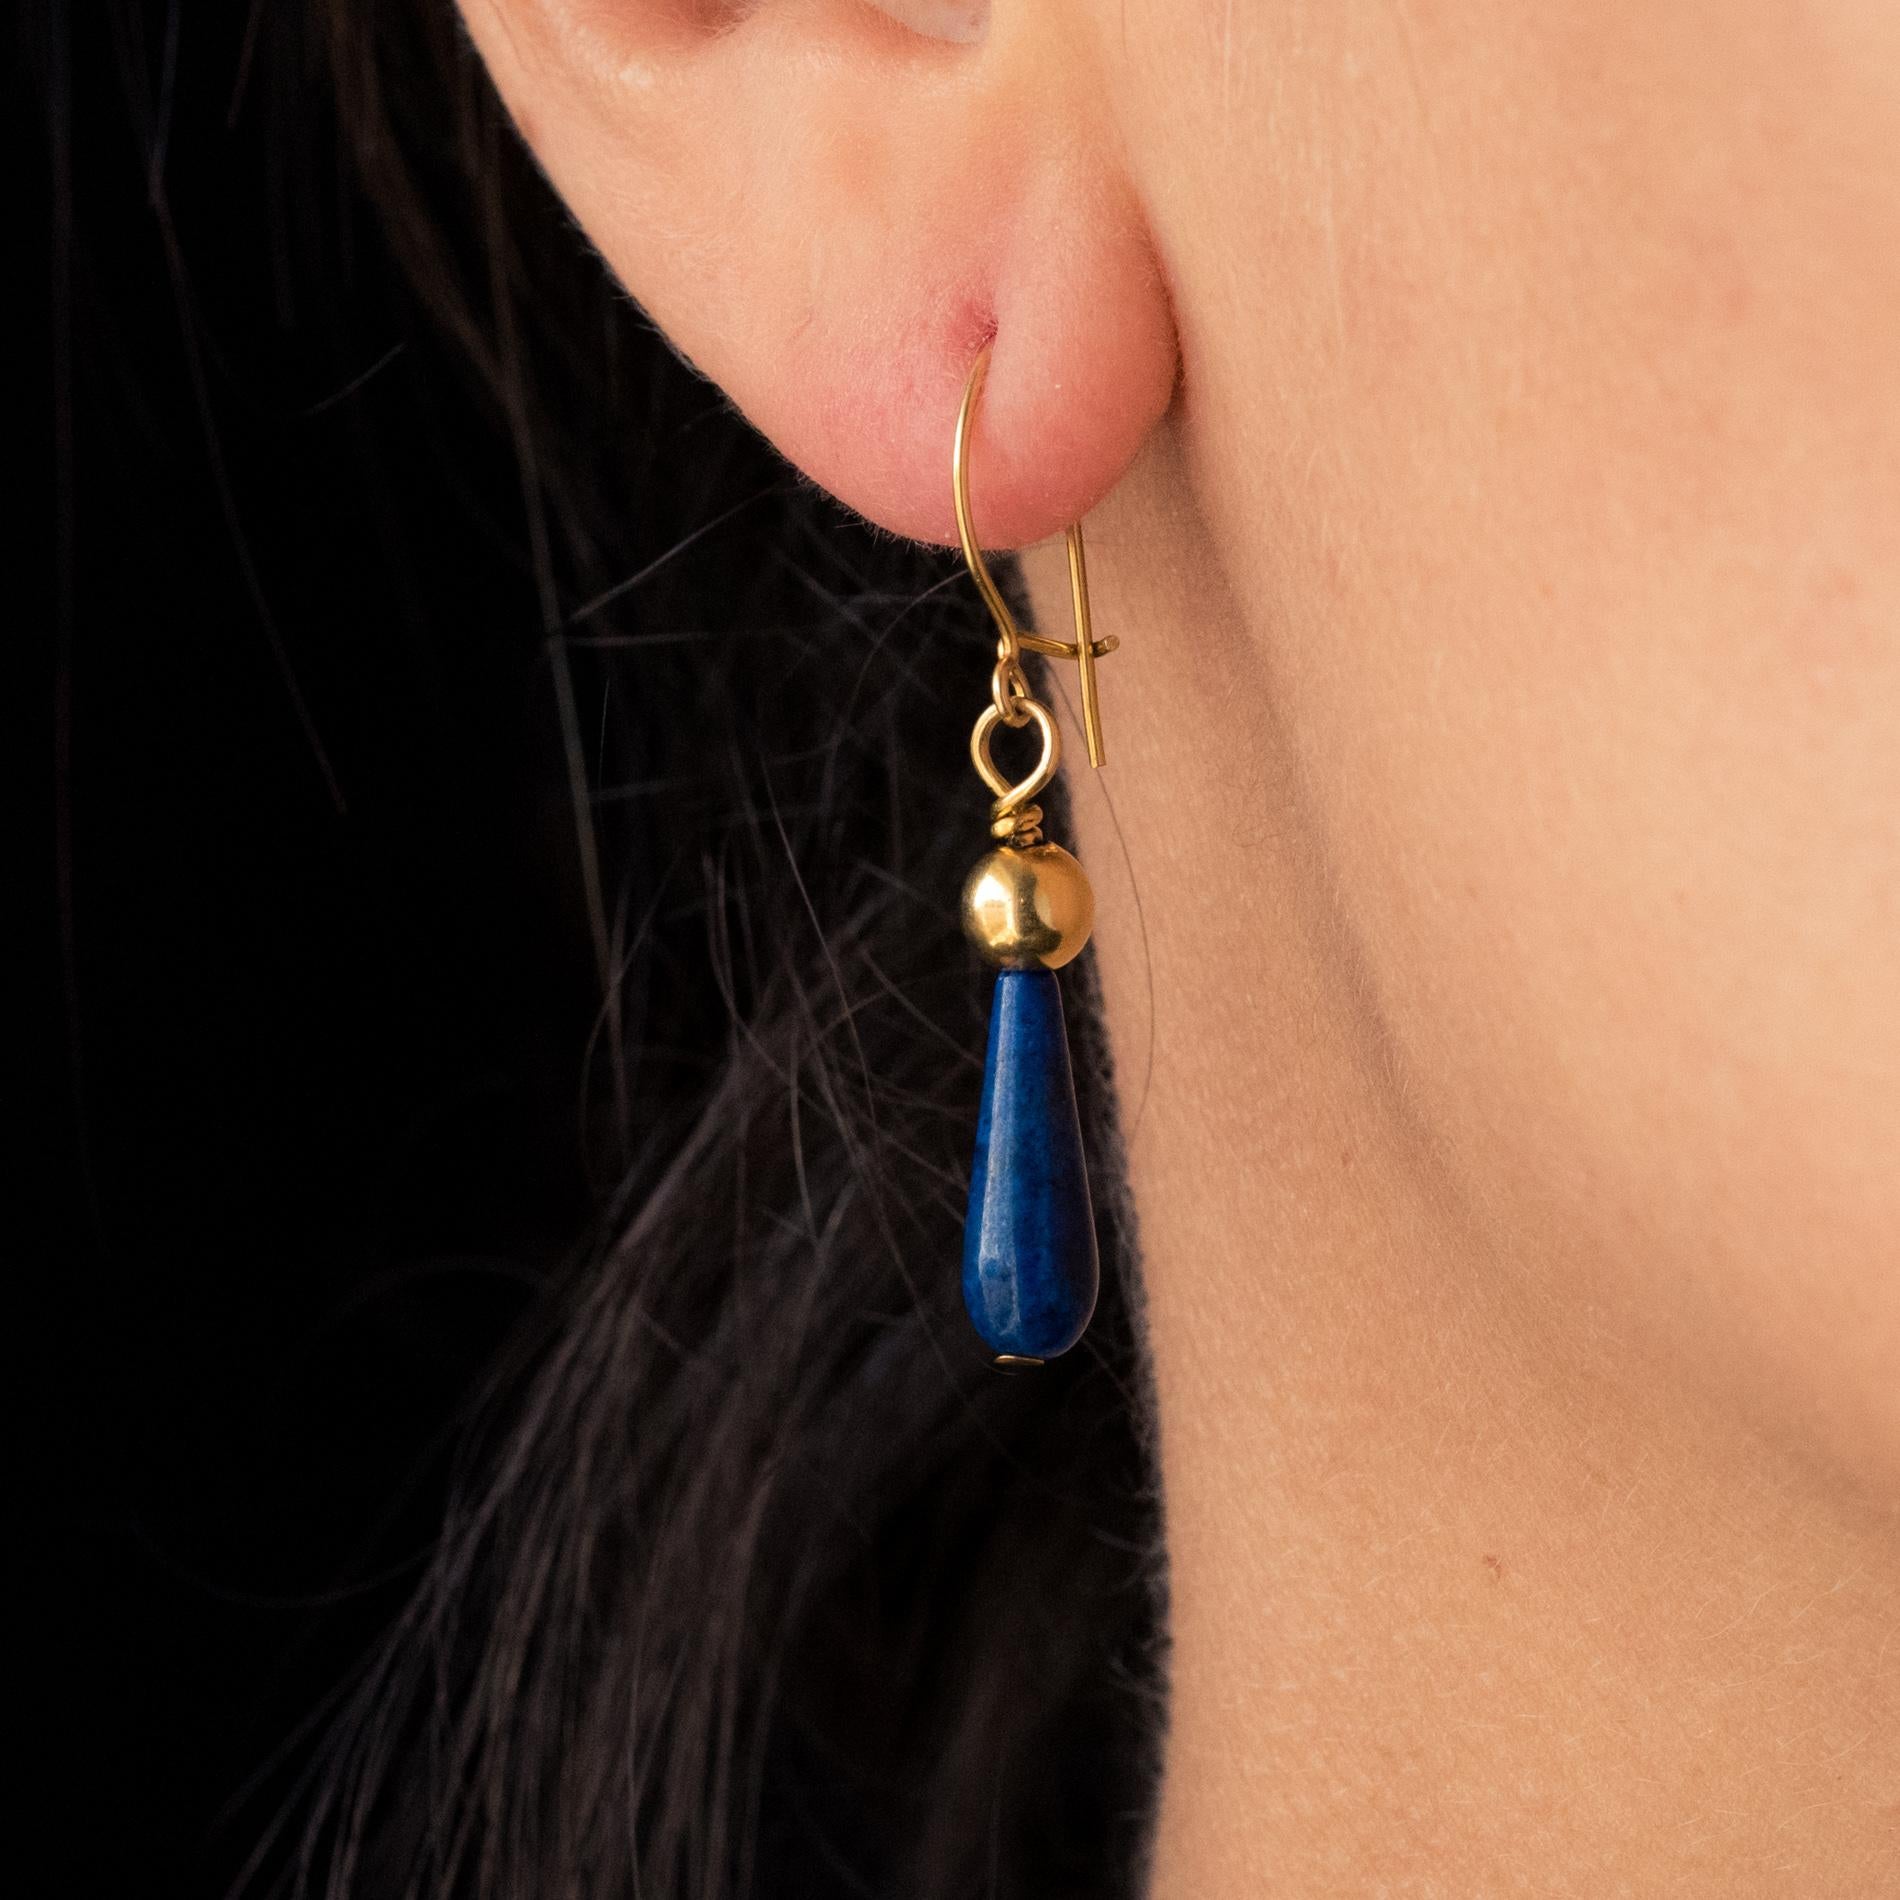 For pierced ears.
Pair of pendant earrings in 18 karat yellow gold.
Each earring is adorned with a long drop of lapis lazuli, topped with a gold pearl.
Length : 3.8 cm.
Total weight of the jewel : approximately 1.6 g.
Second-hand earrings -